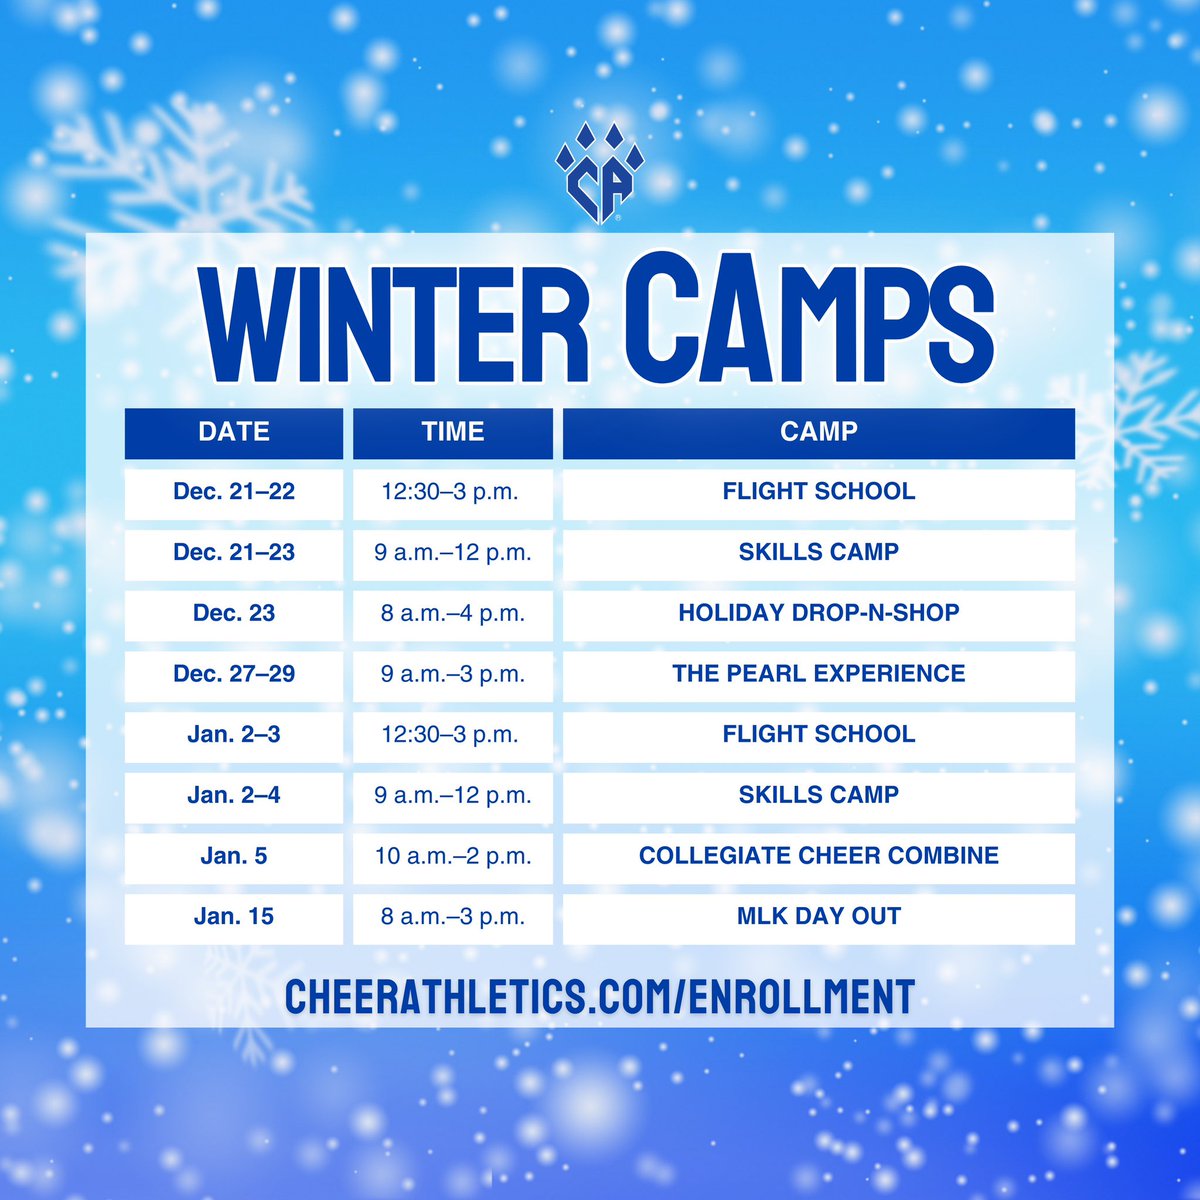 While it’s important to take a little break during the holidays, we know that a lot of athletes find value staying checked-in with a camp, workout or lesson! Take a look at ALL the awesome events offered over Winter Break at CA Plano! You belong here. Register today!! 😸😺❄️❄️